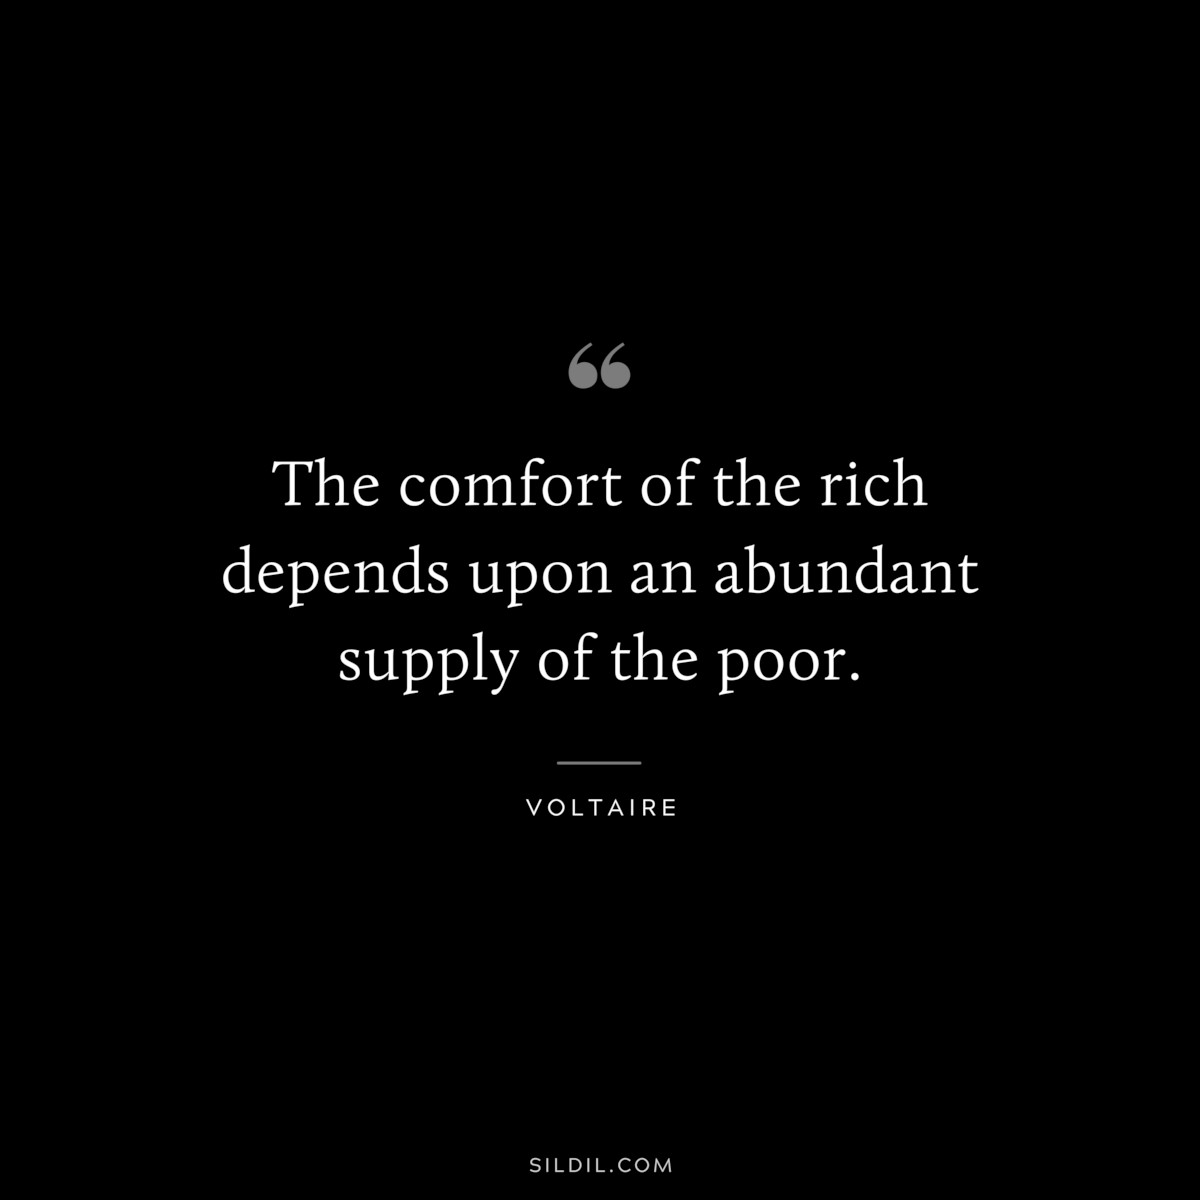 The comfort of the rich depends upon an abundant supply of the poor. ― Voltaire